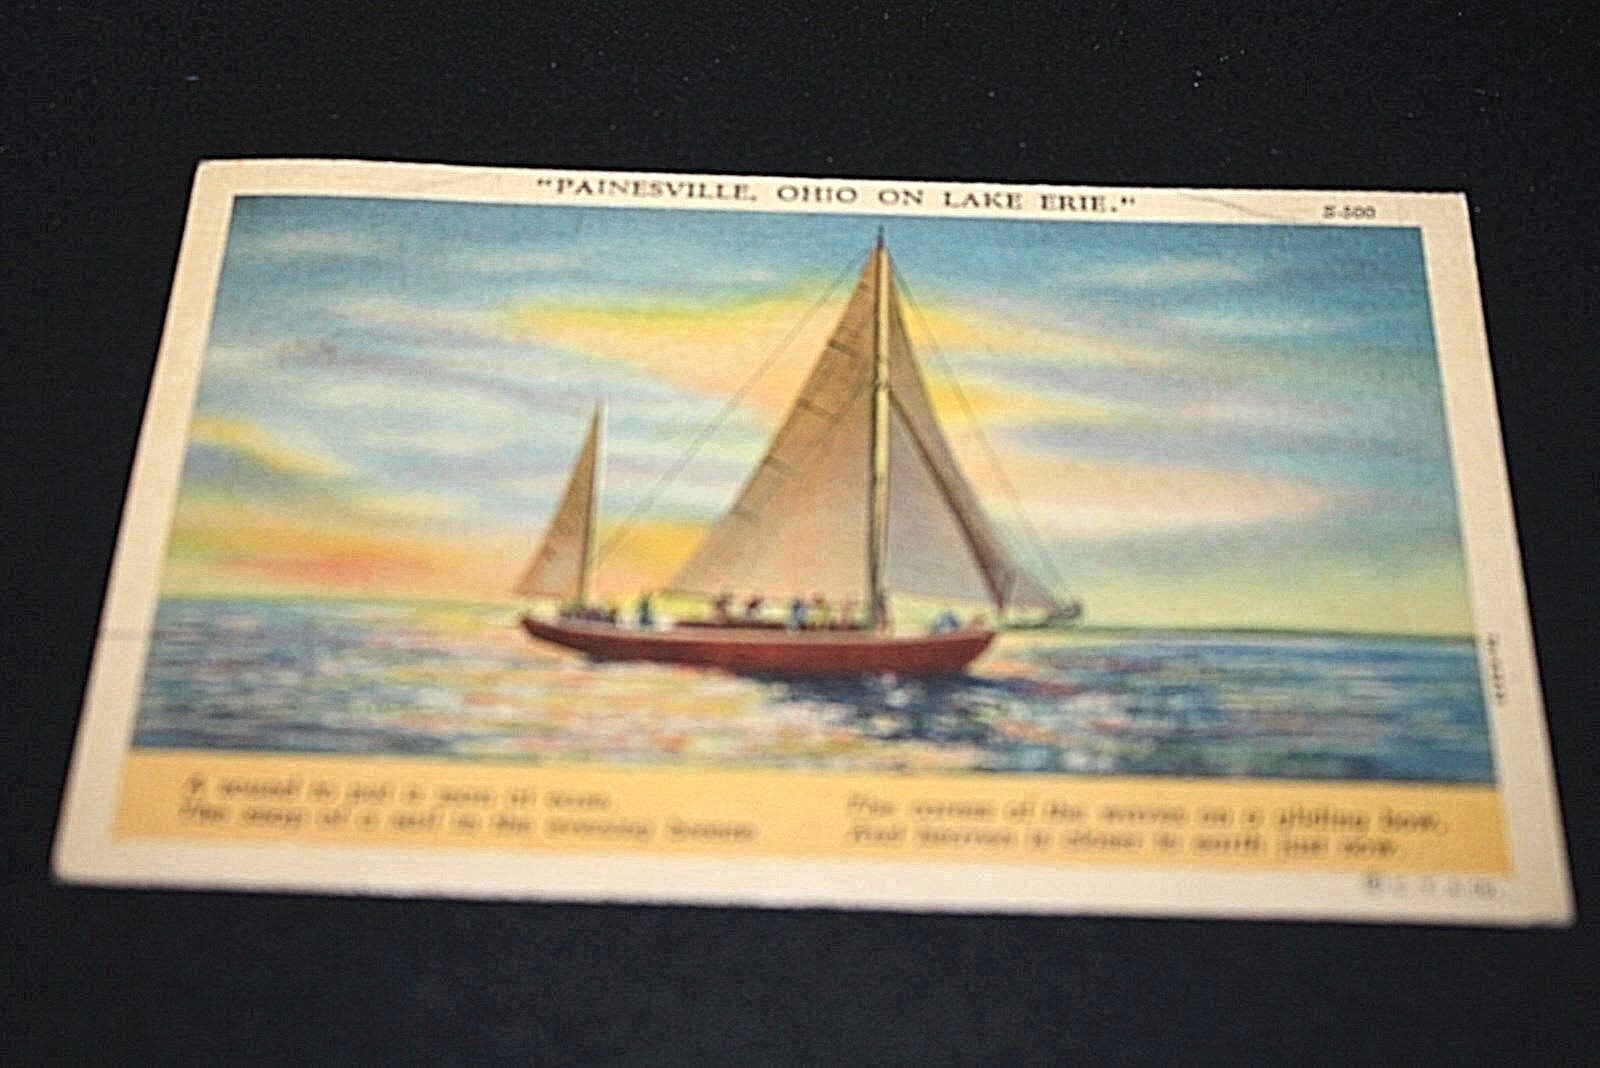 Vintage Boat Postcard 1930s Painesville OH on Lake Erie Ship 1939  - 